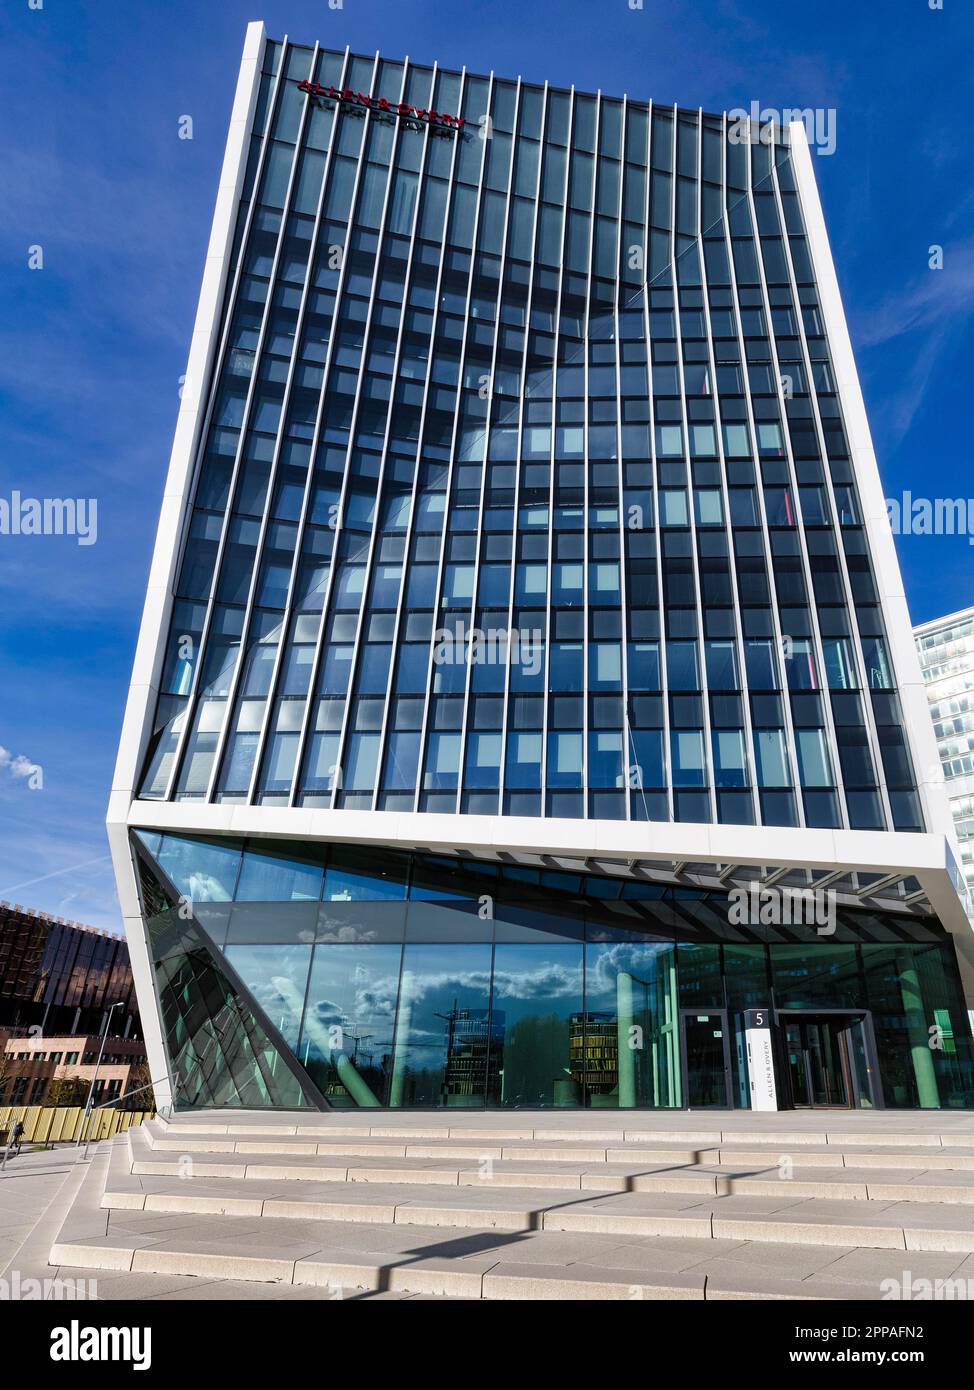 Office tower, law firm Allen & Overy Luxembourg, modern architecture, Avenue John F. Kennedy, European Quarter Kirchberg Plateau, Luxembourg Stock Photo